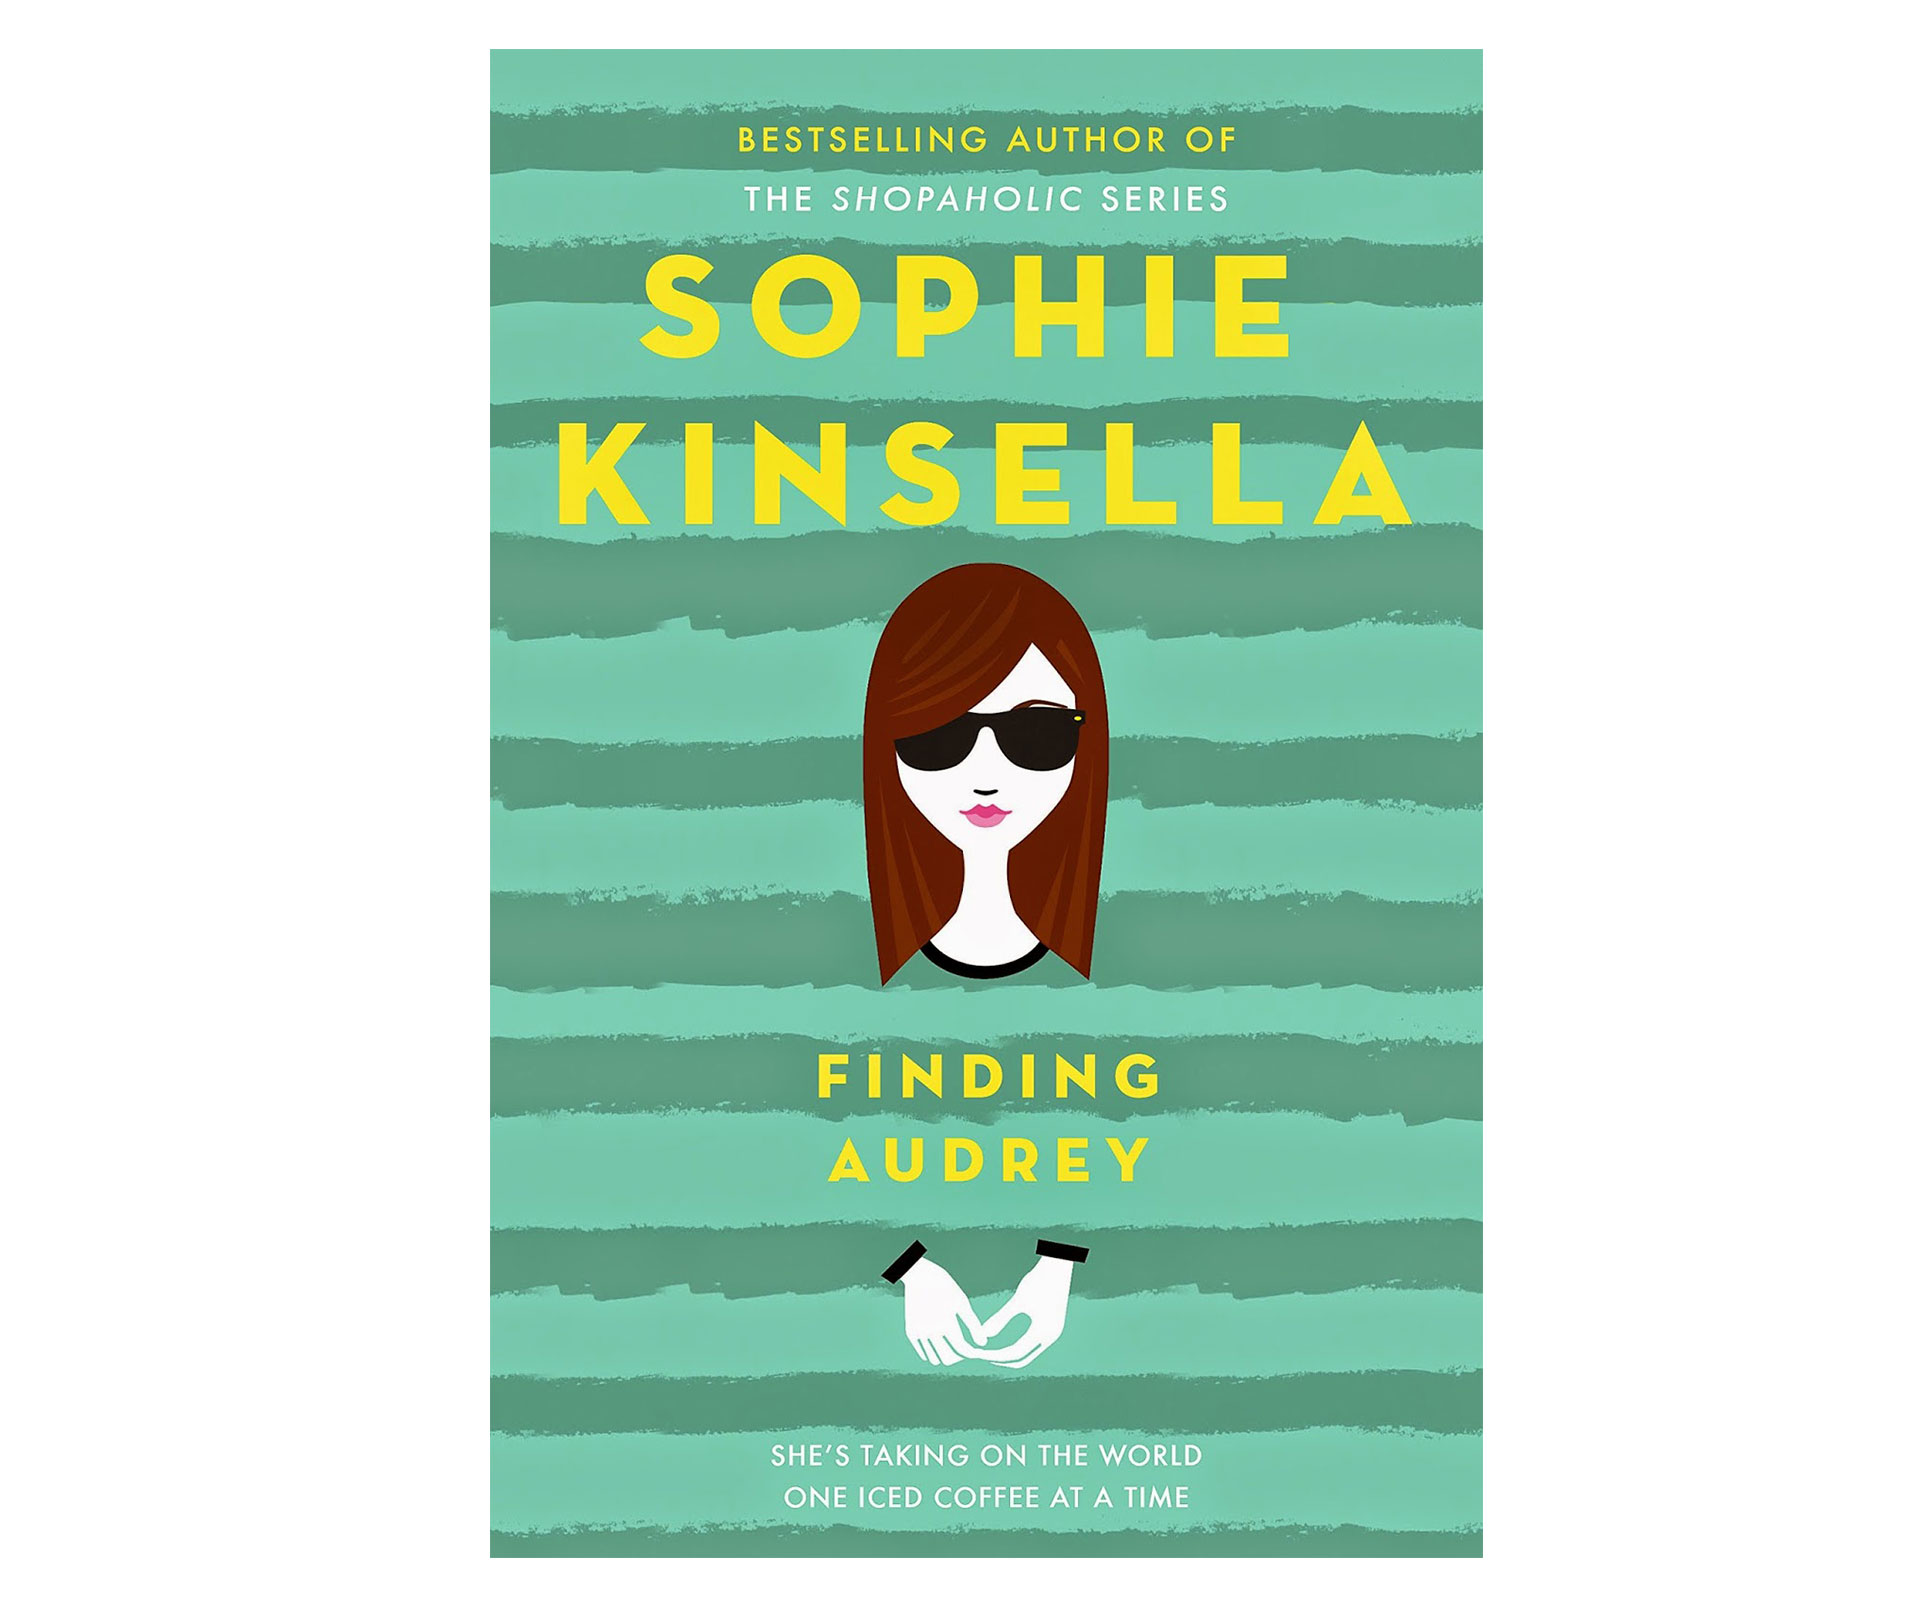 Book cover of Finding Audrey by Sophie Kinsella